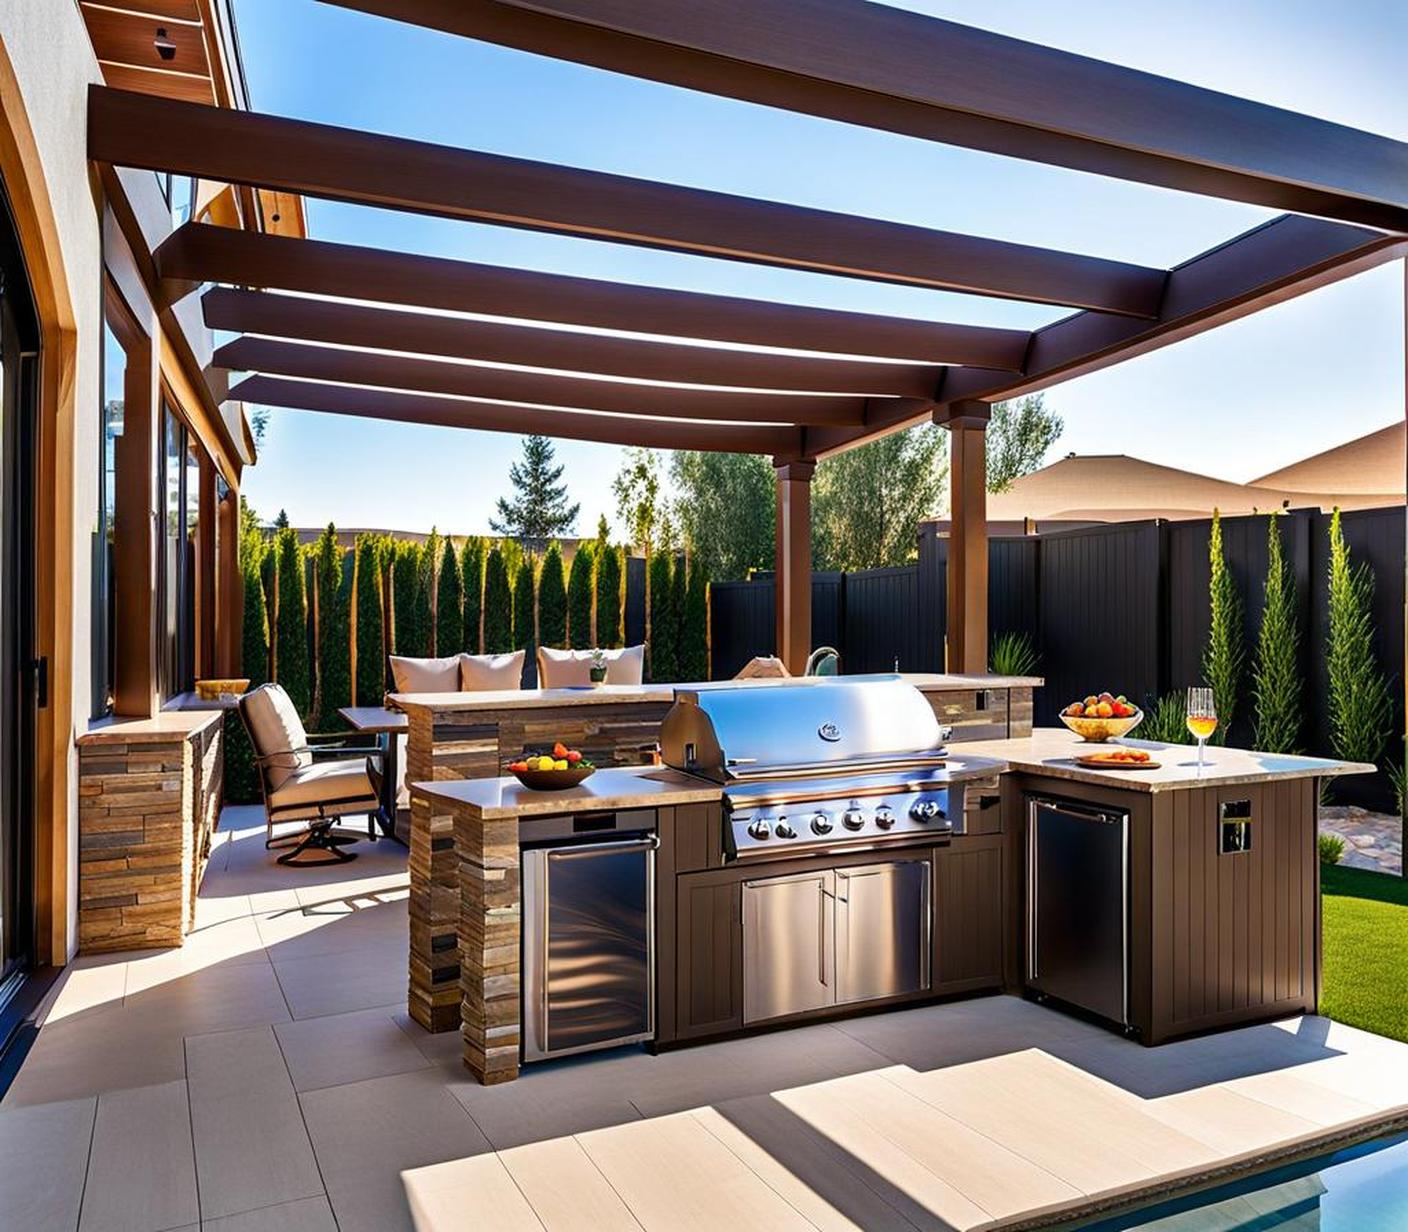 Extend Your Home with Outdoor Rooms and Kitchen Canopies